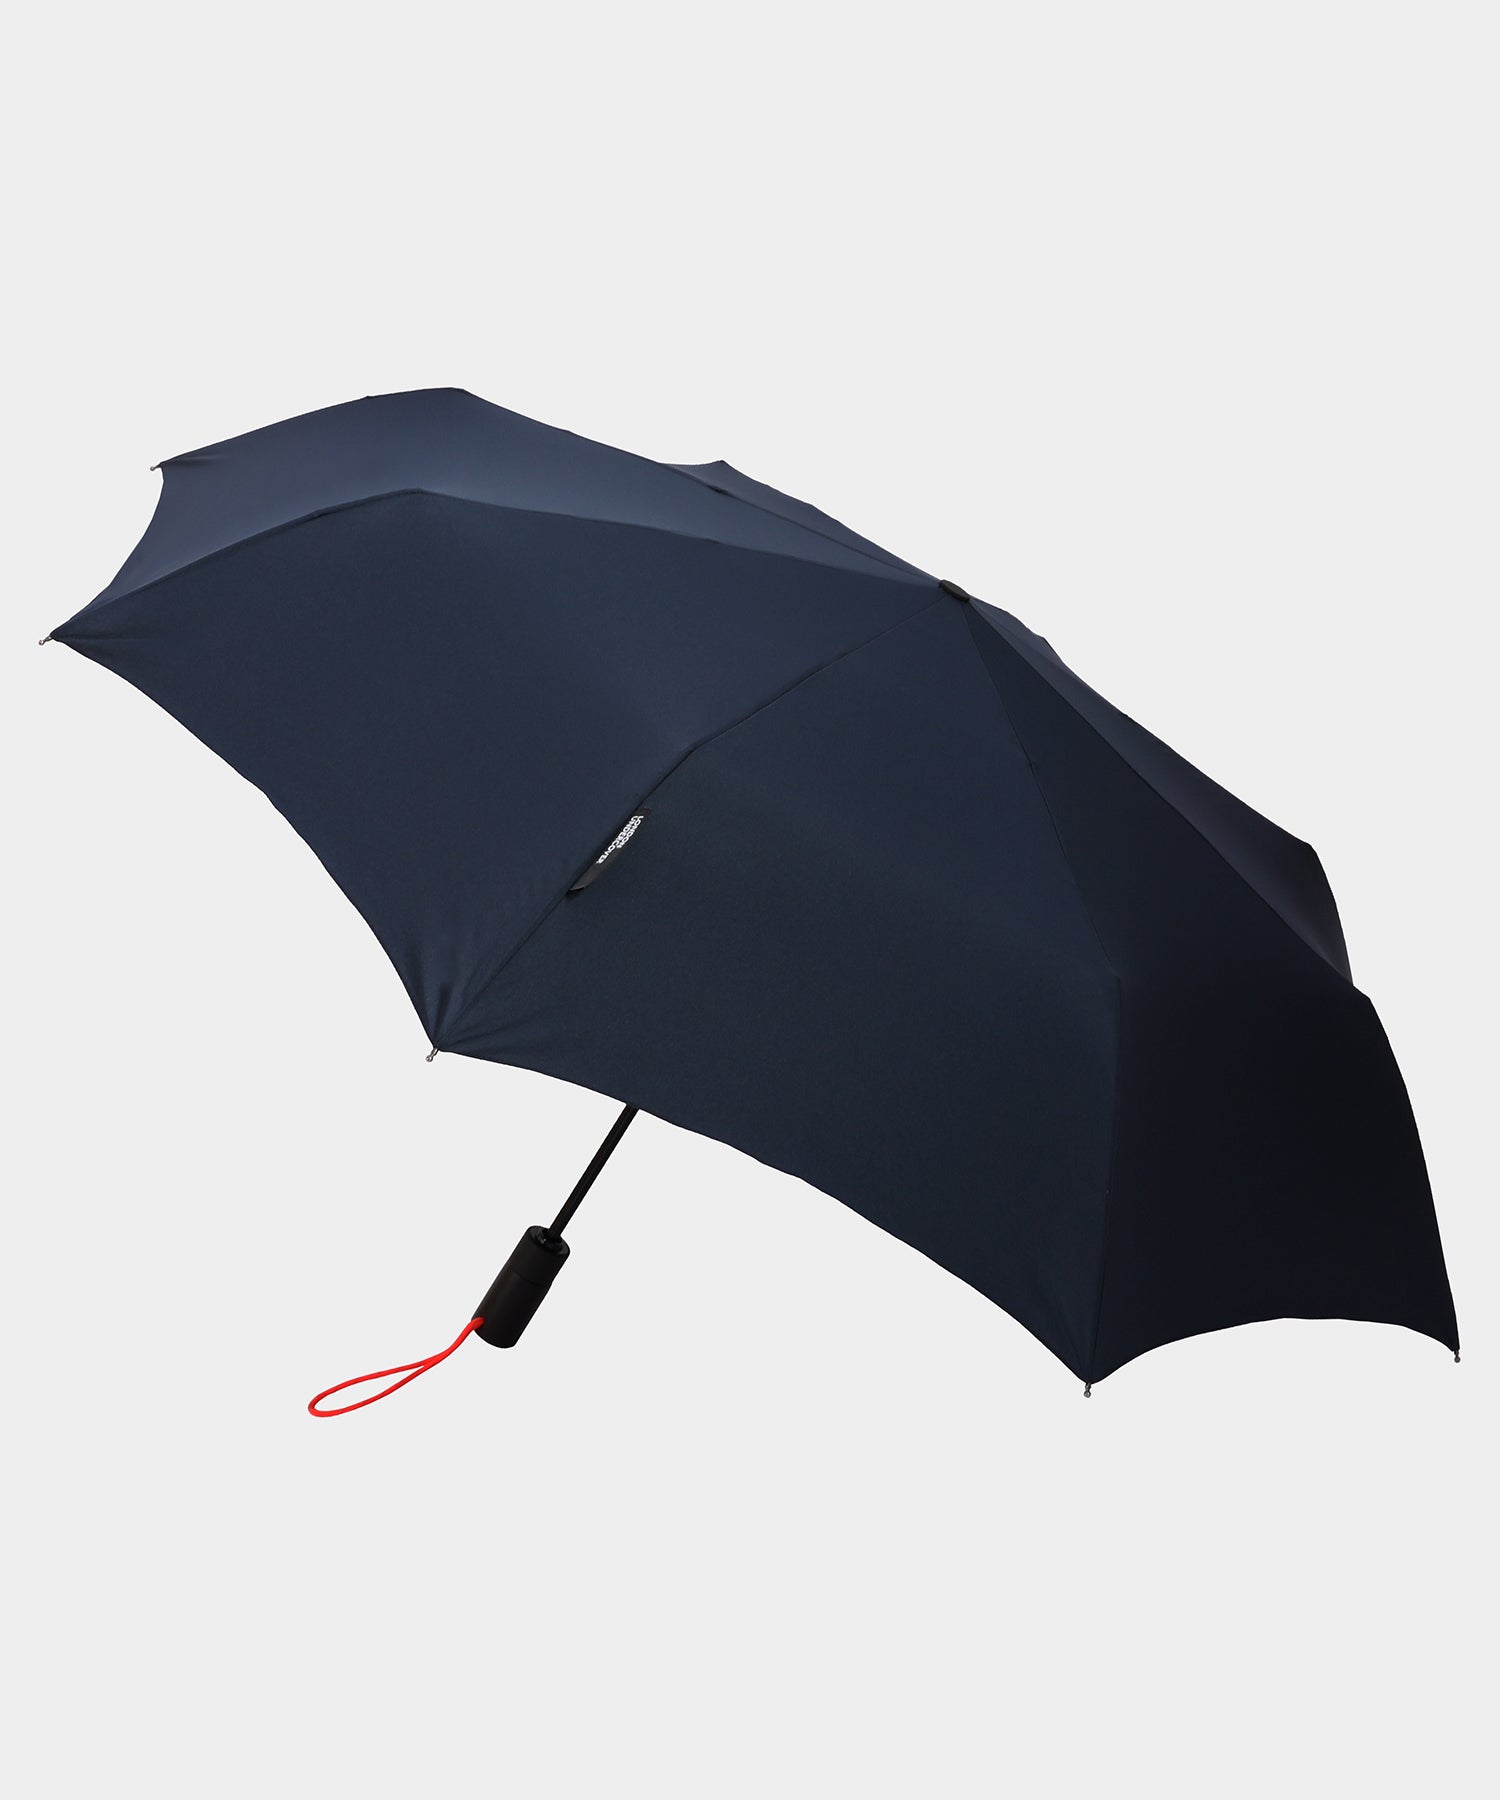 London Undercover Auto-Compact Umbrella in Navy with Neon Strap